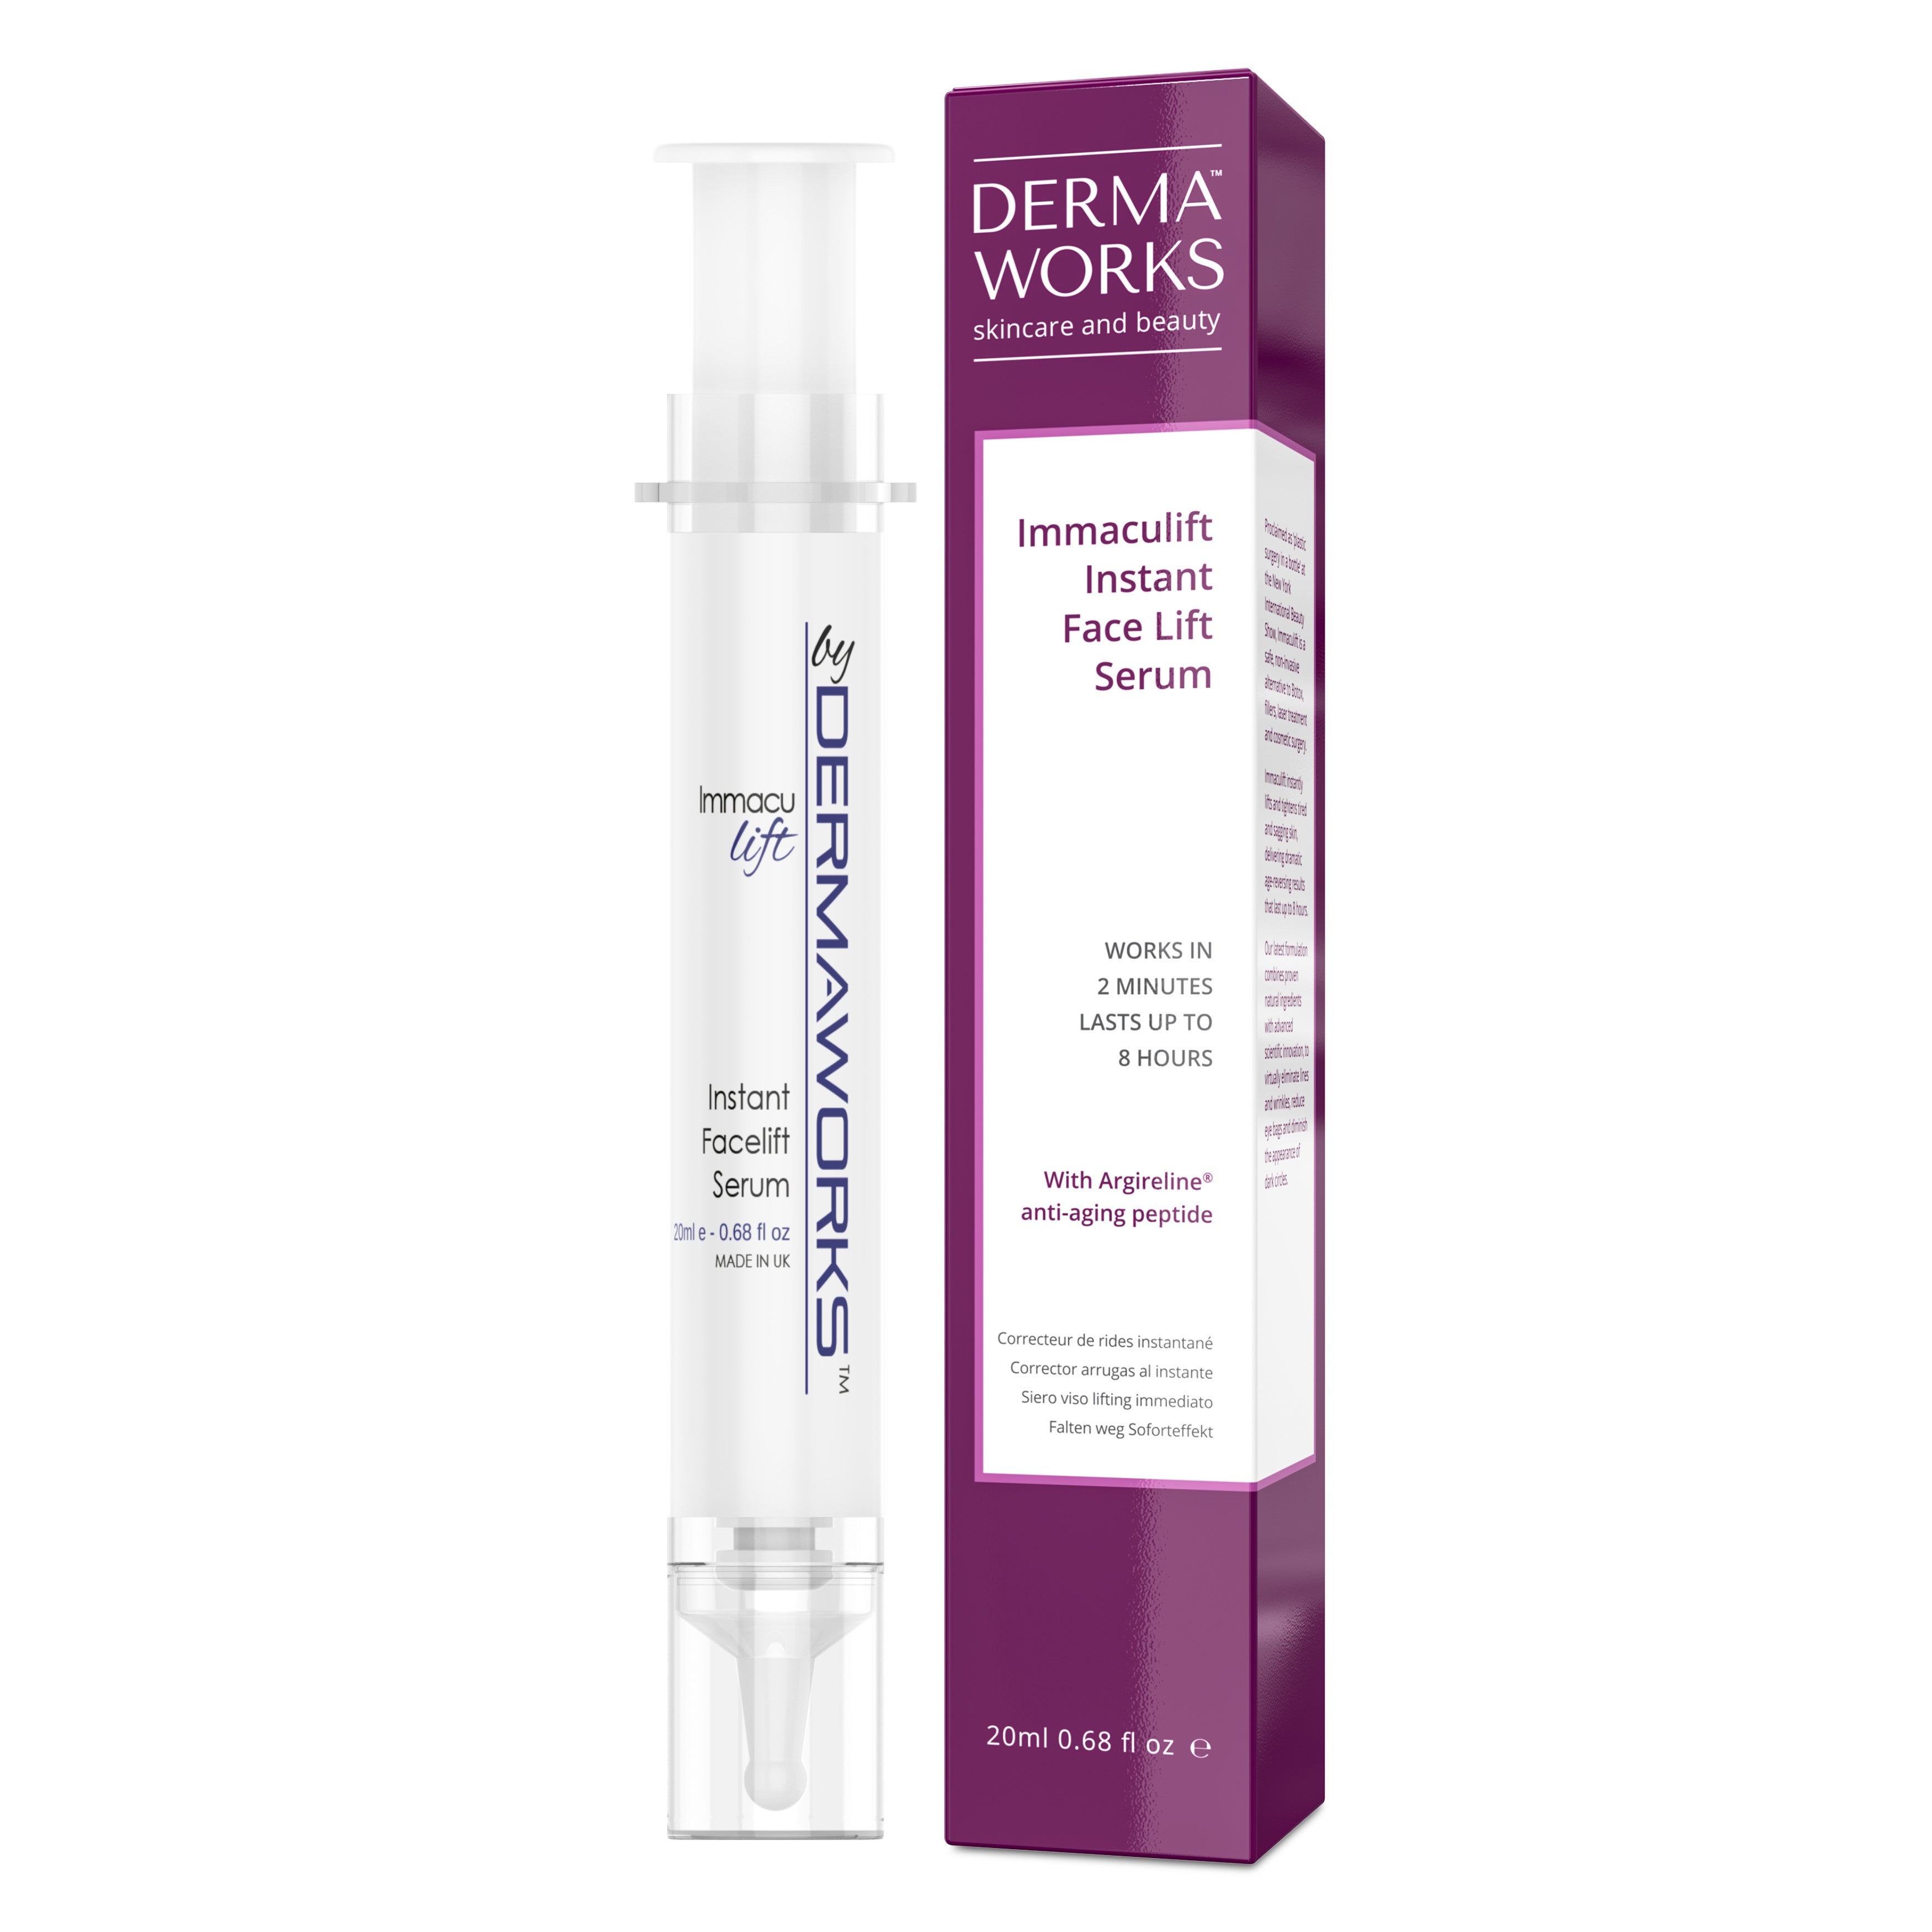 Dermaworks Immaculift eye lift serum is a non-surgical alternative to botox and fillers for tighter skin, a reduction in puffy eyes, eye bags and dark circles.